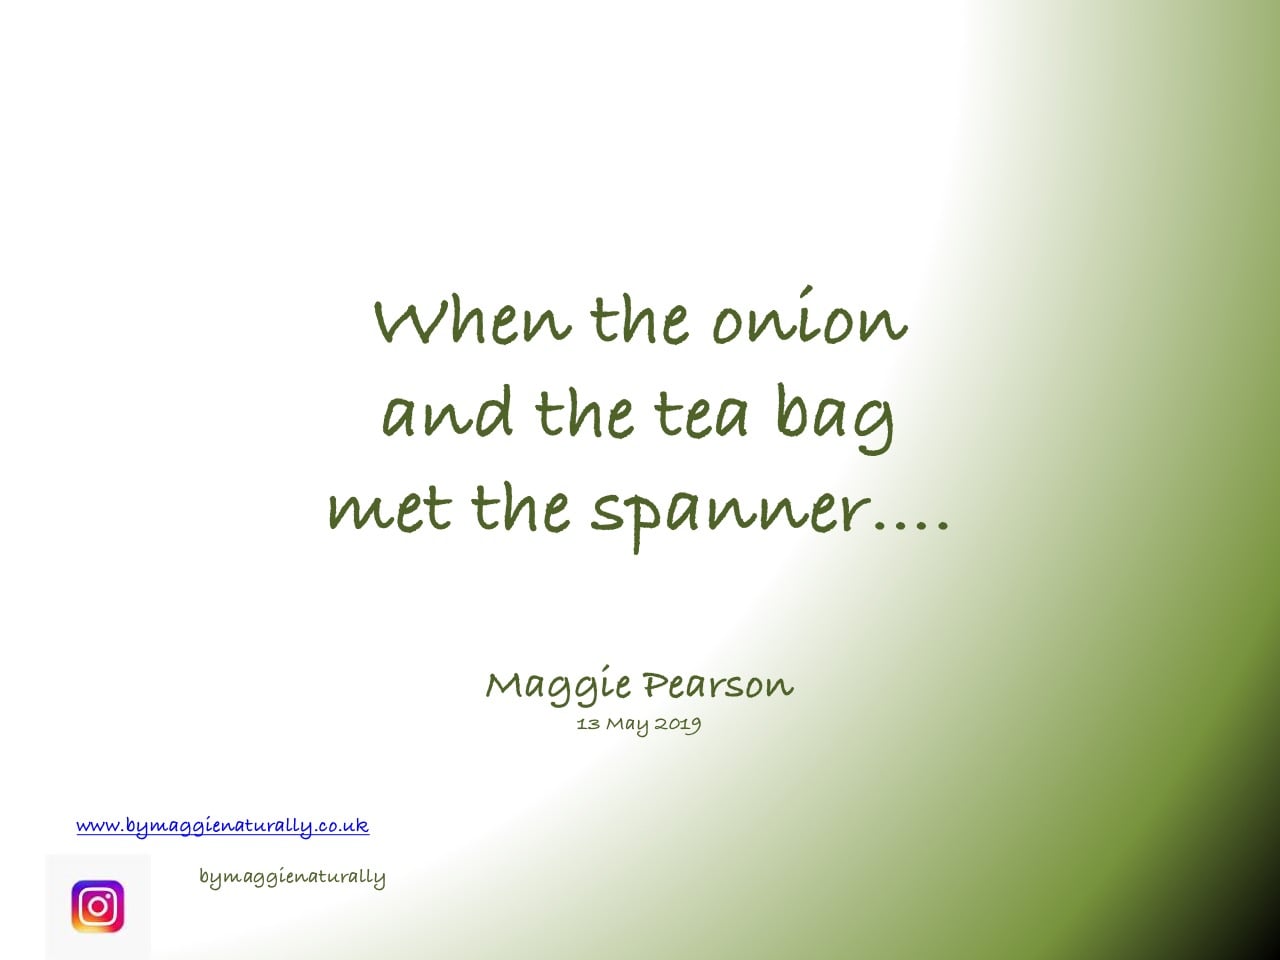 When the onion and the tea bag met the spanner…. Maggie Pearson